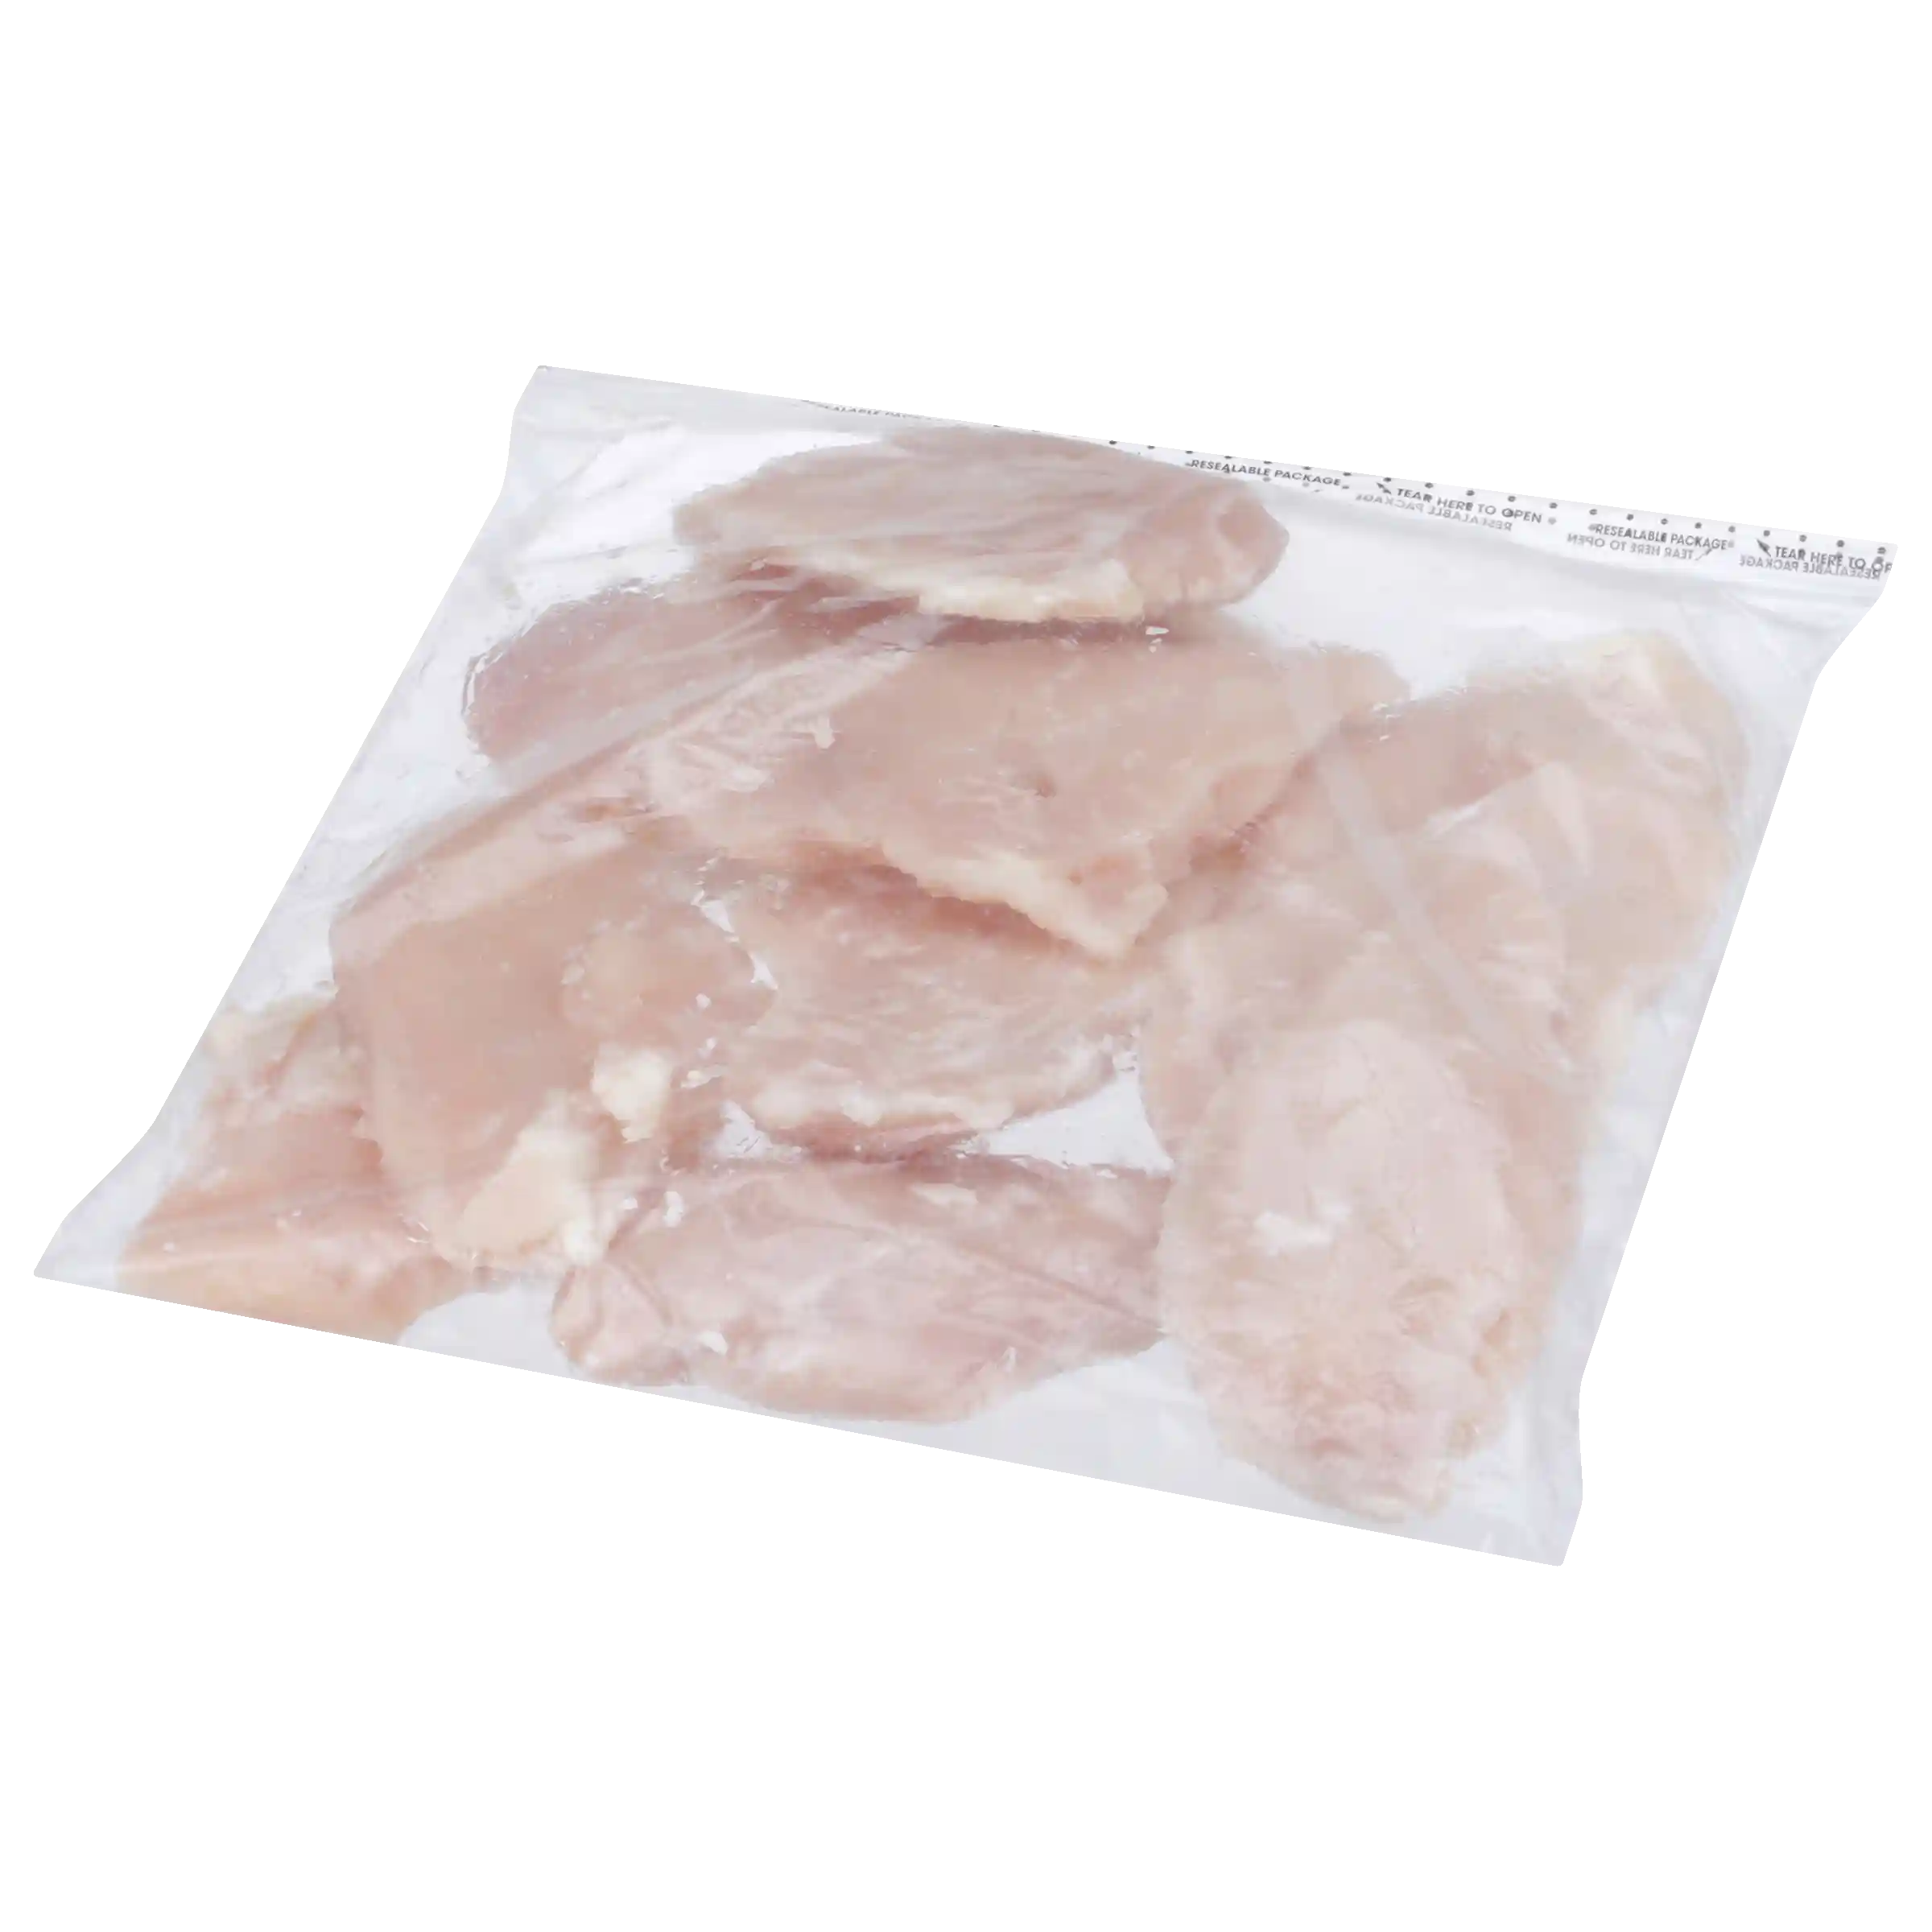 Tyson® All Natural* IF Unbreaded Boneless Skinless Chicken Breast Filets, 7 oz._image_31